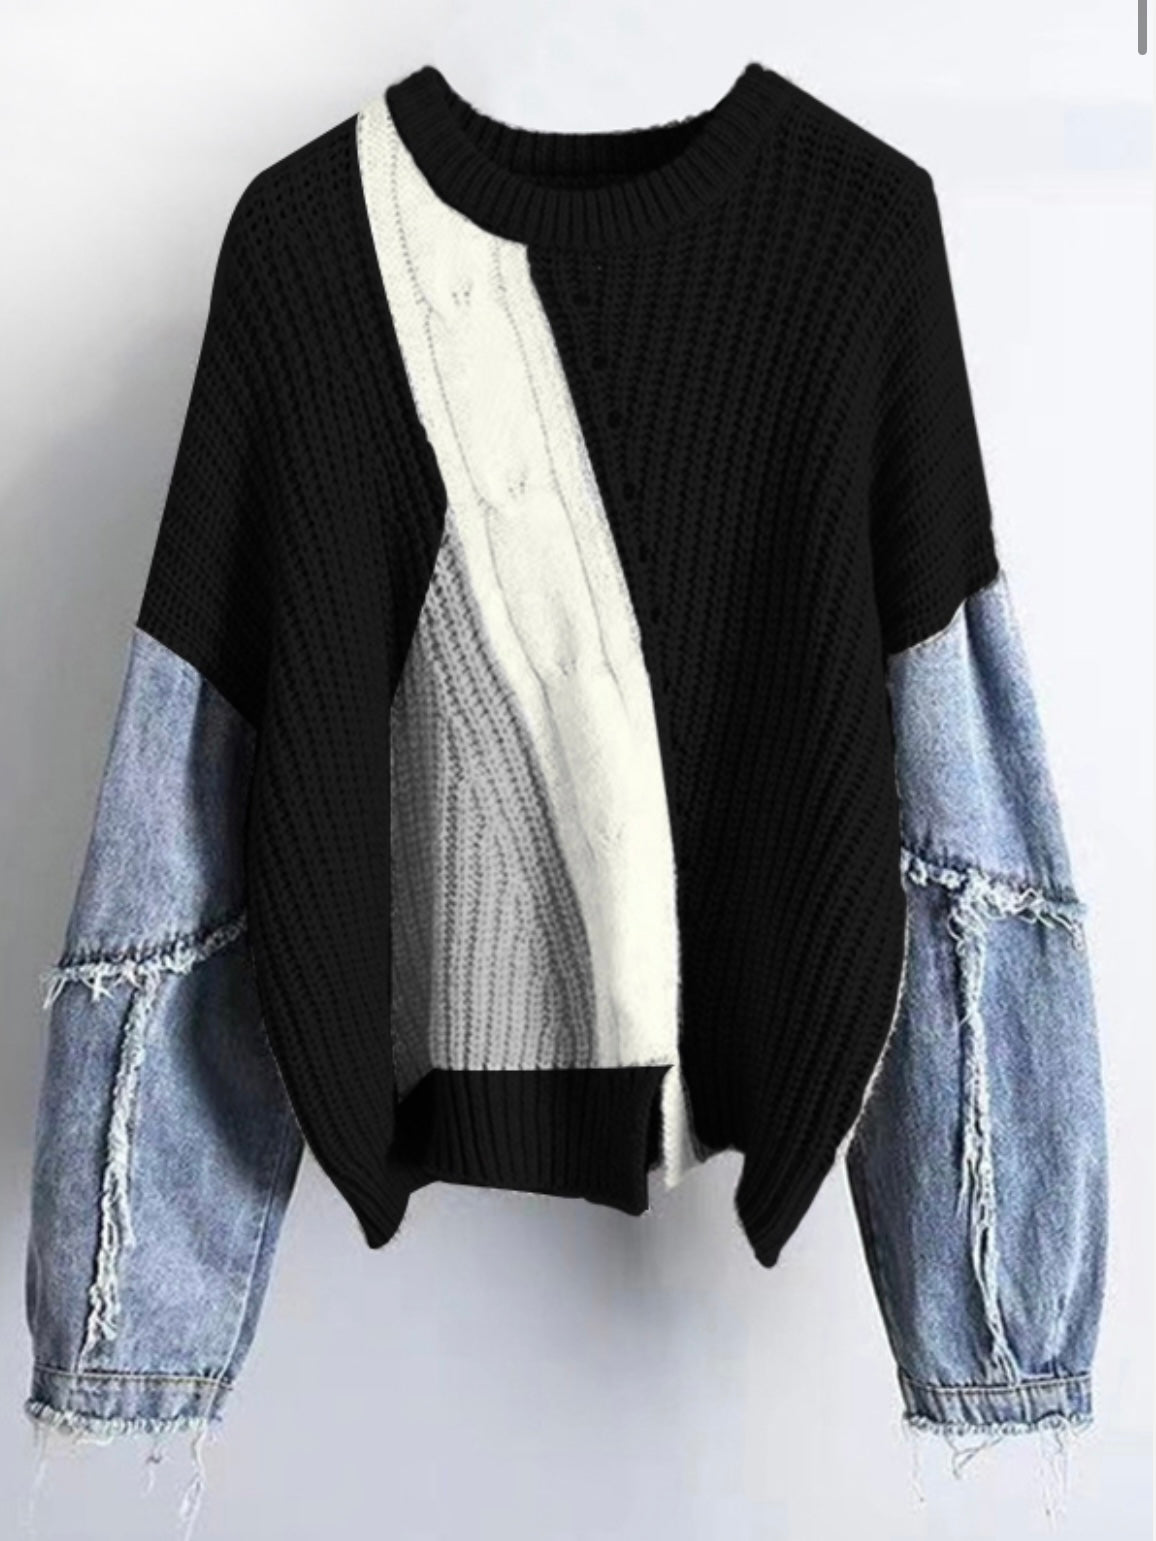 Denim Sleeve Knit Sweater | 2 - Colors Available